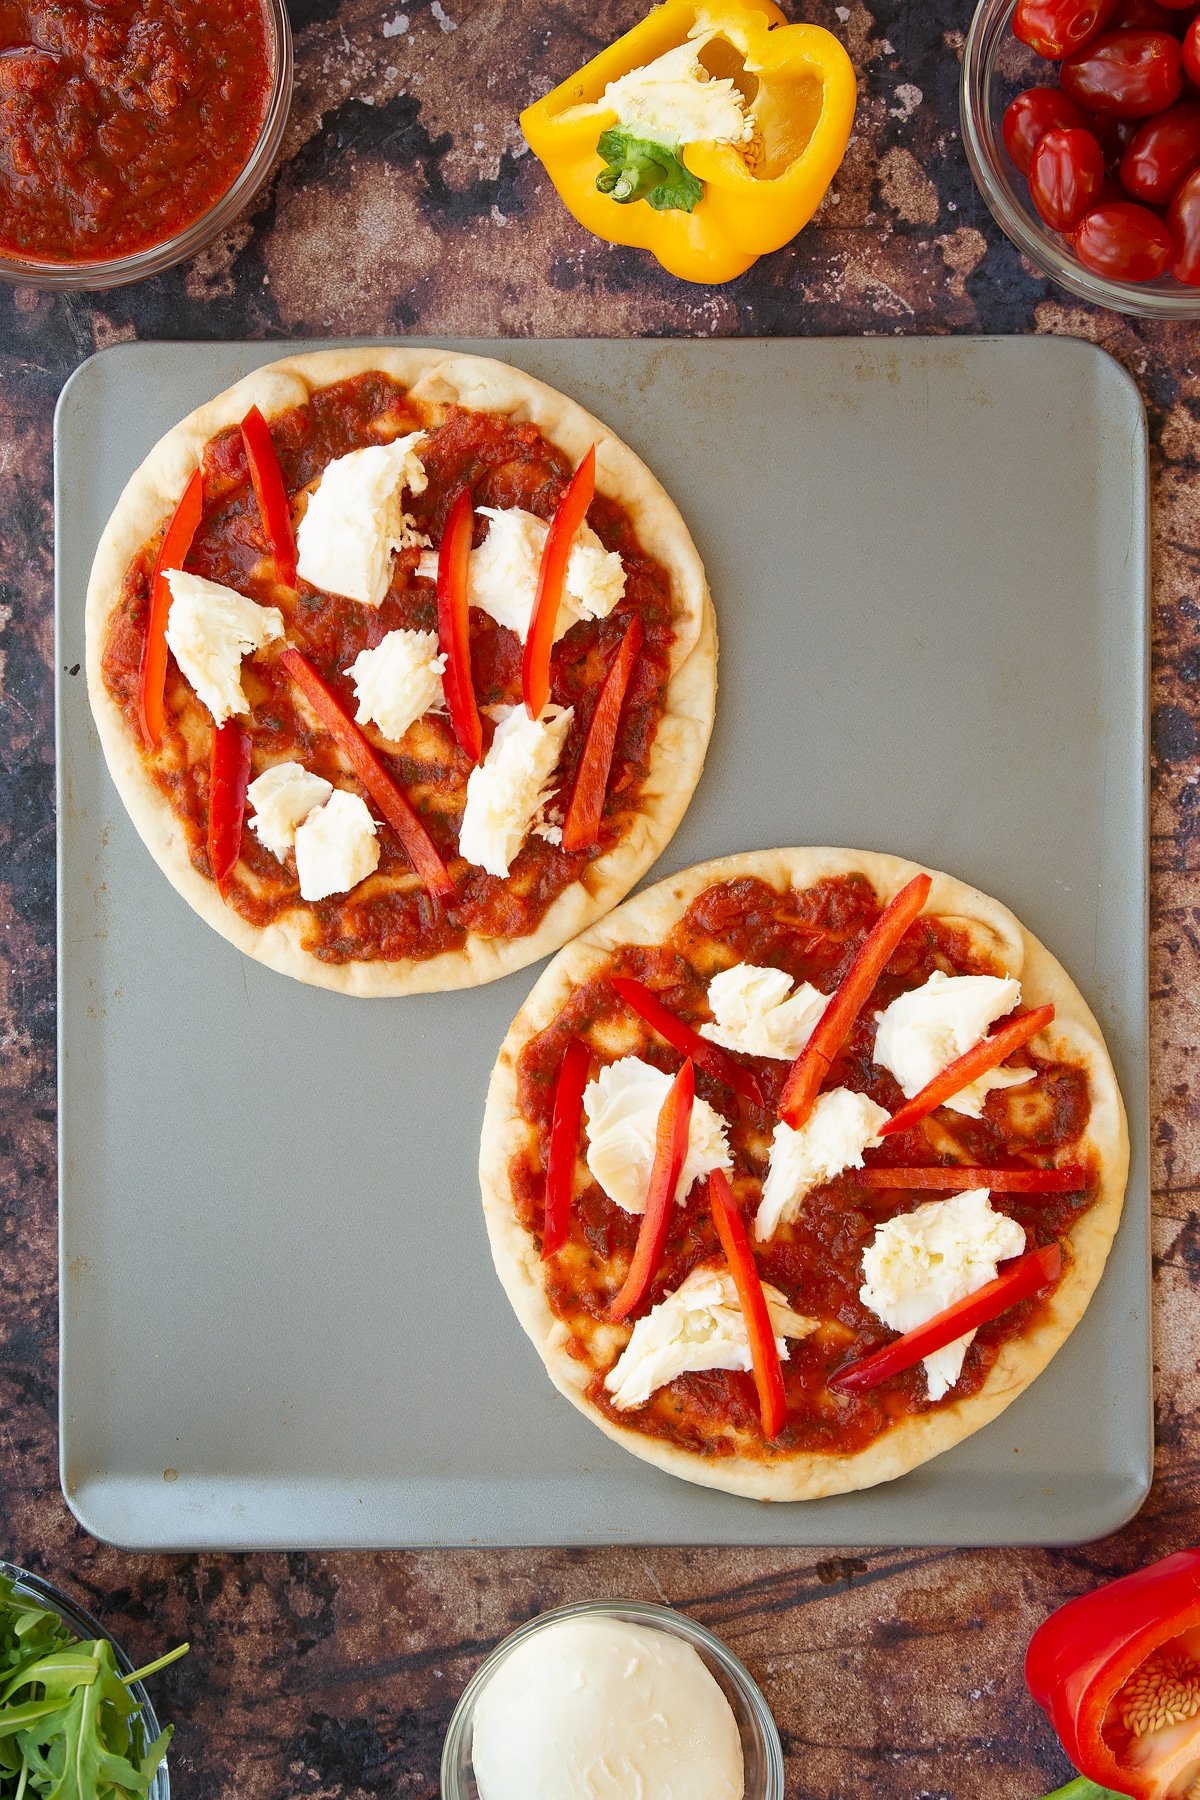 2 flatbreads on a baking tray topped with tomato pasta sauce, pieces of mozzarella and red sliced peppers.